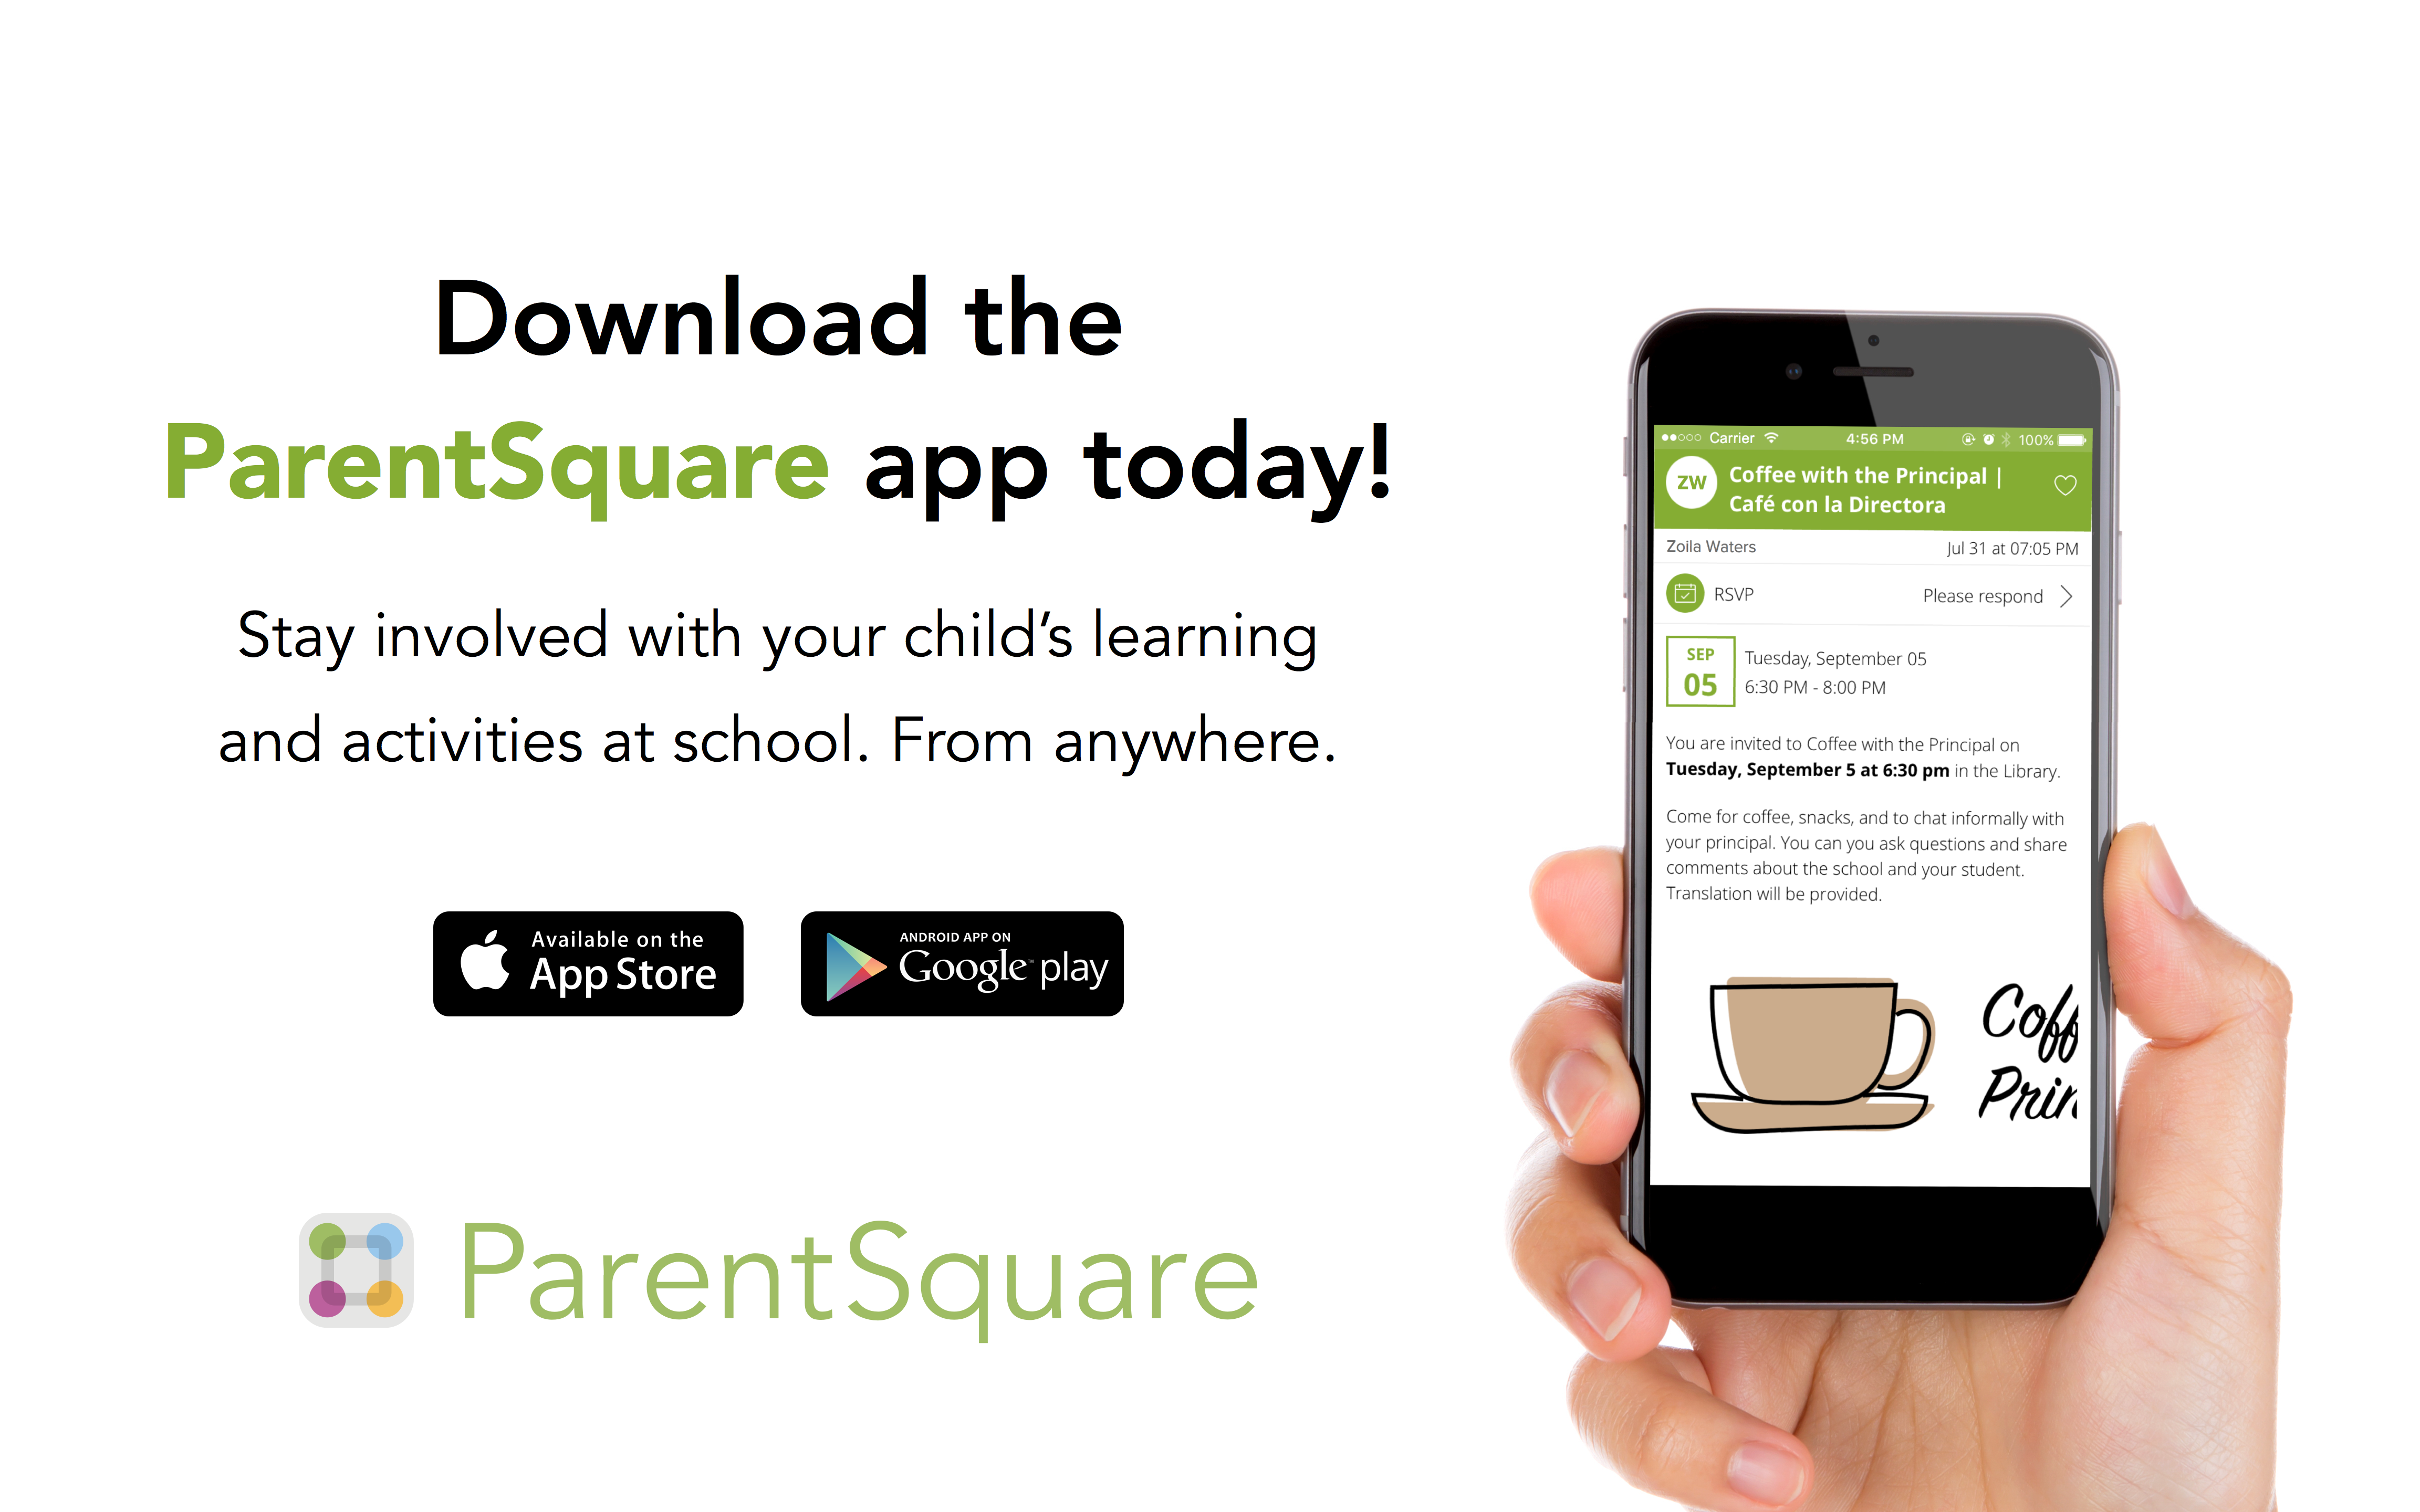 Join Parent Square